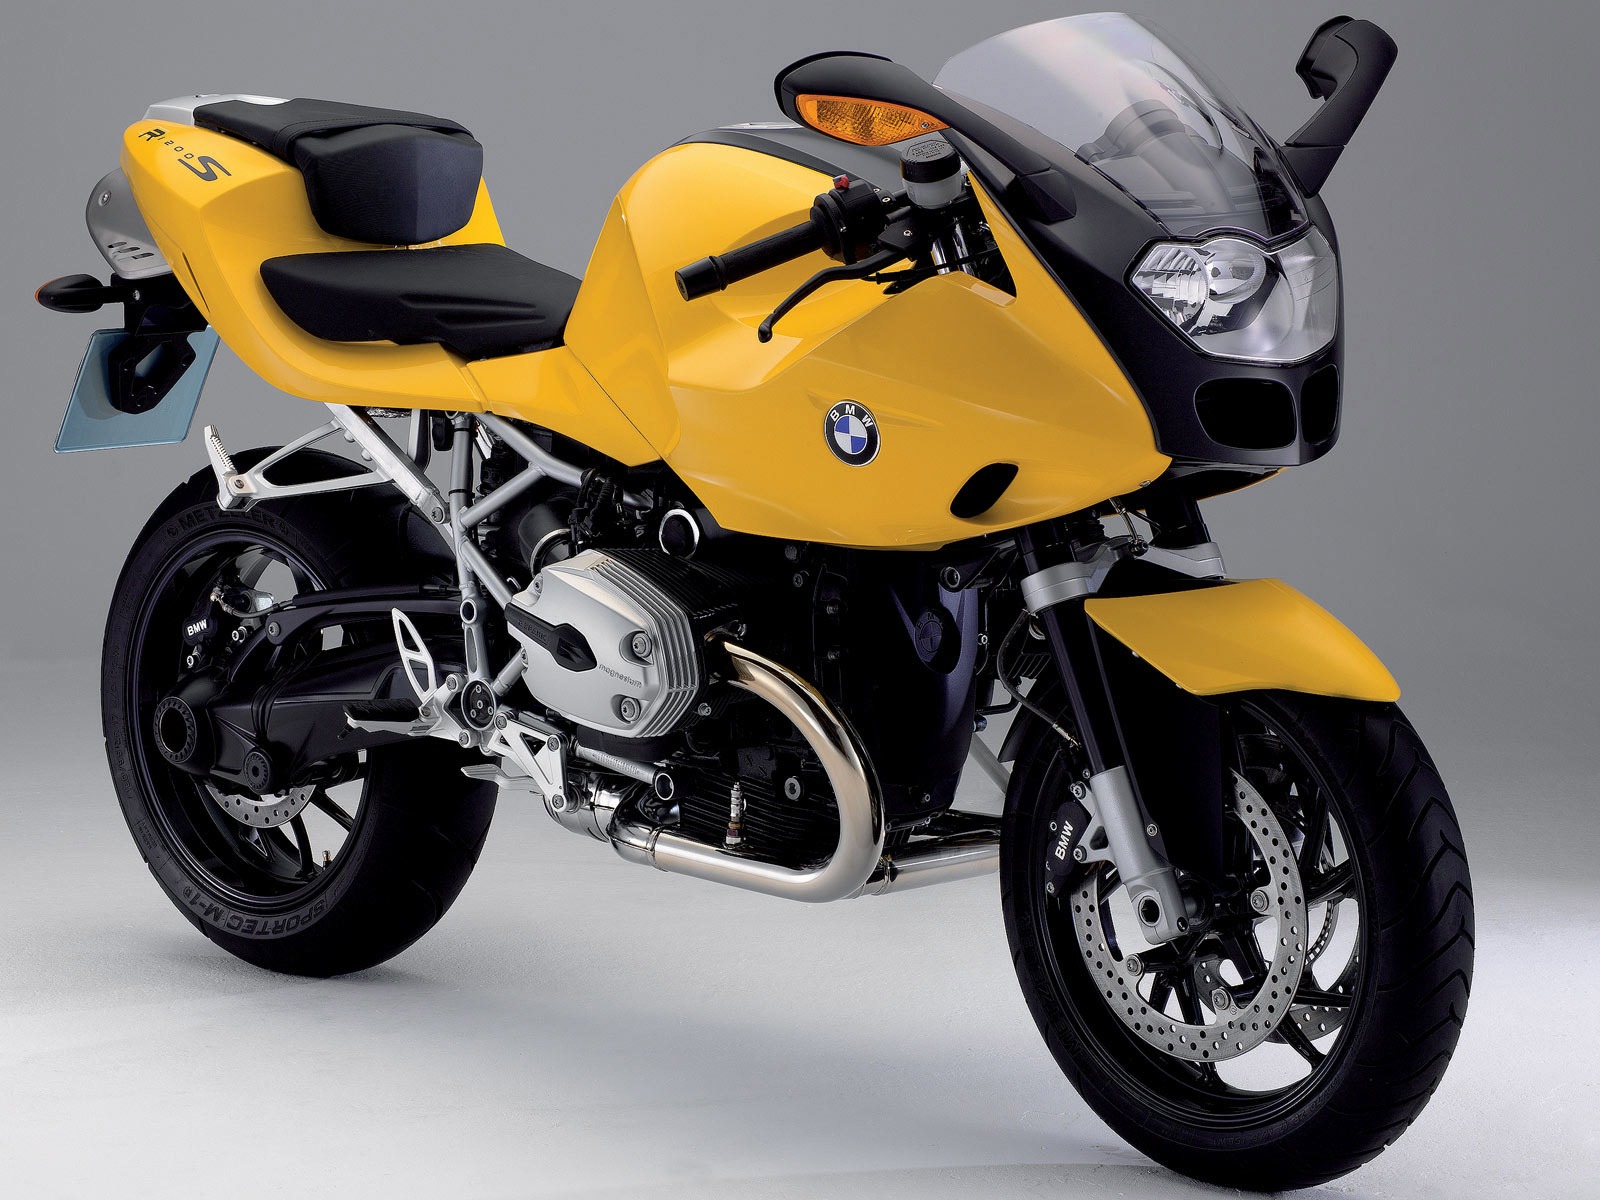 BMW motorcycle wallpapers (2) #5 - 1600x1200